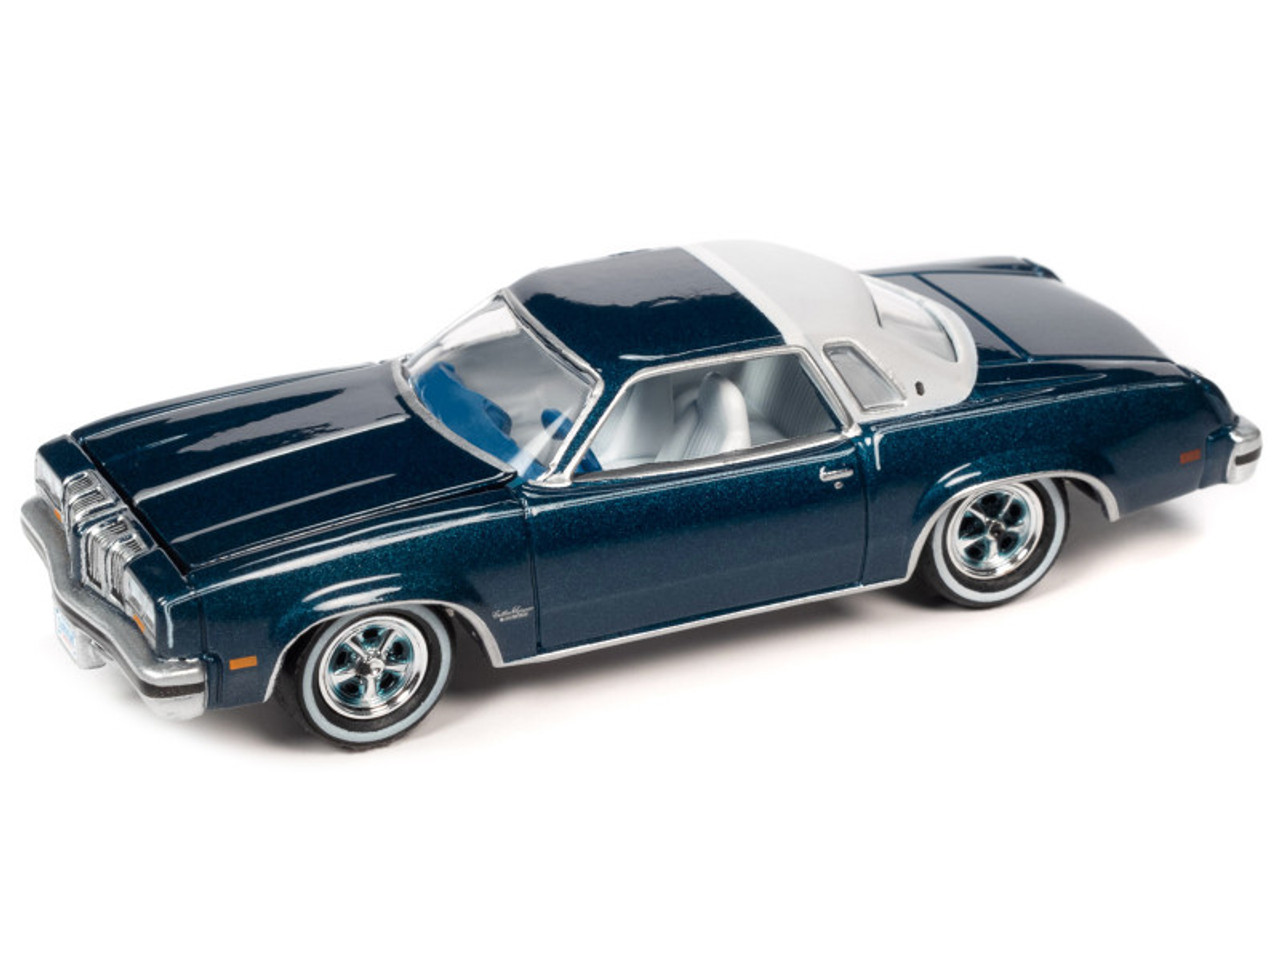 1976 Oldsmobile Cutlass Supreme Dark Blue Metallic with White Top & Interior & 1972 Buick Riviera Burnish Bronze Metallic with White Top & Interior "Super Seventies" Set of 2 Cars "2-Packs" 2023 Release 2 1/64 Diecast Model Cars by Johnny Lightning